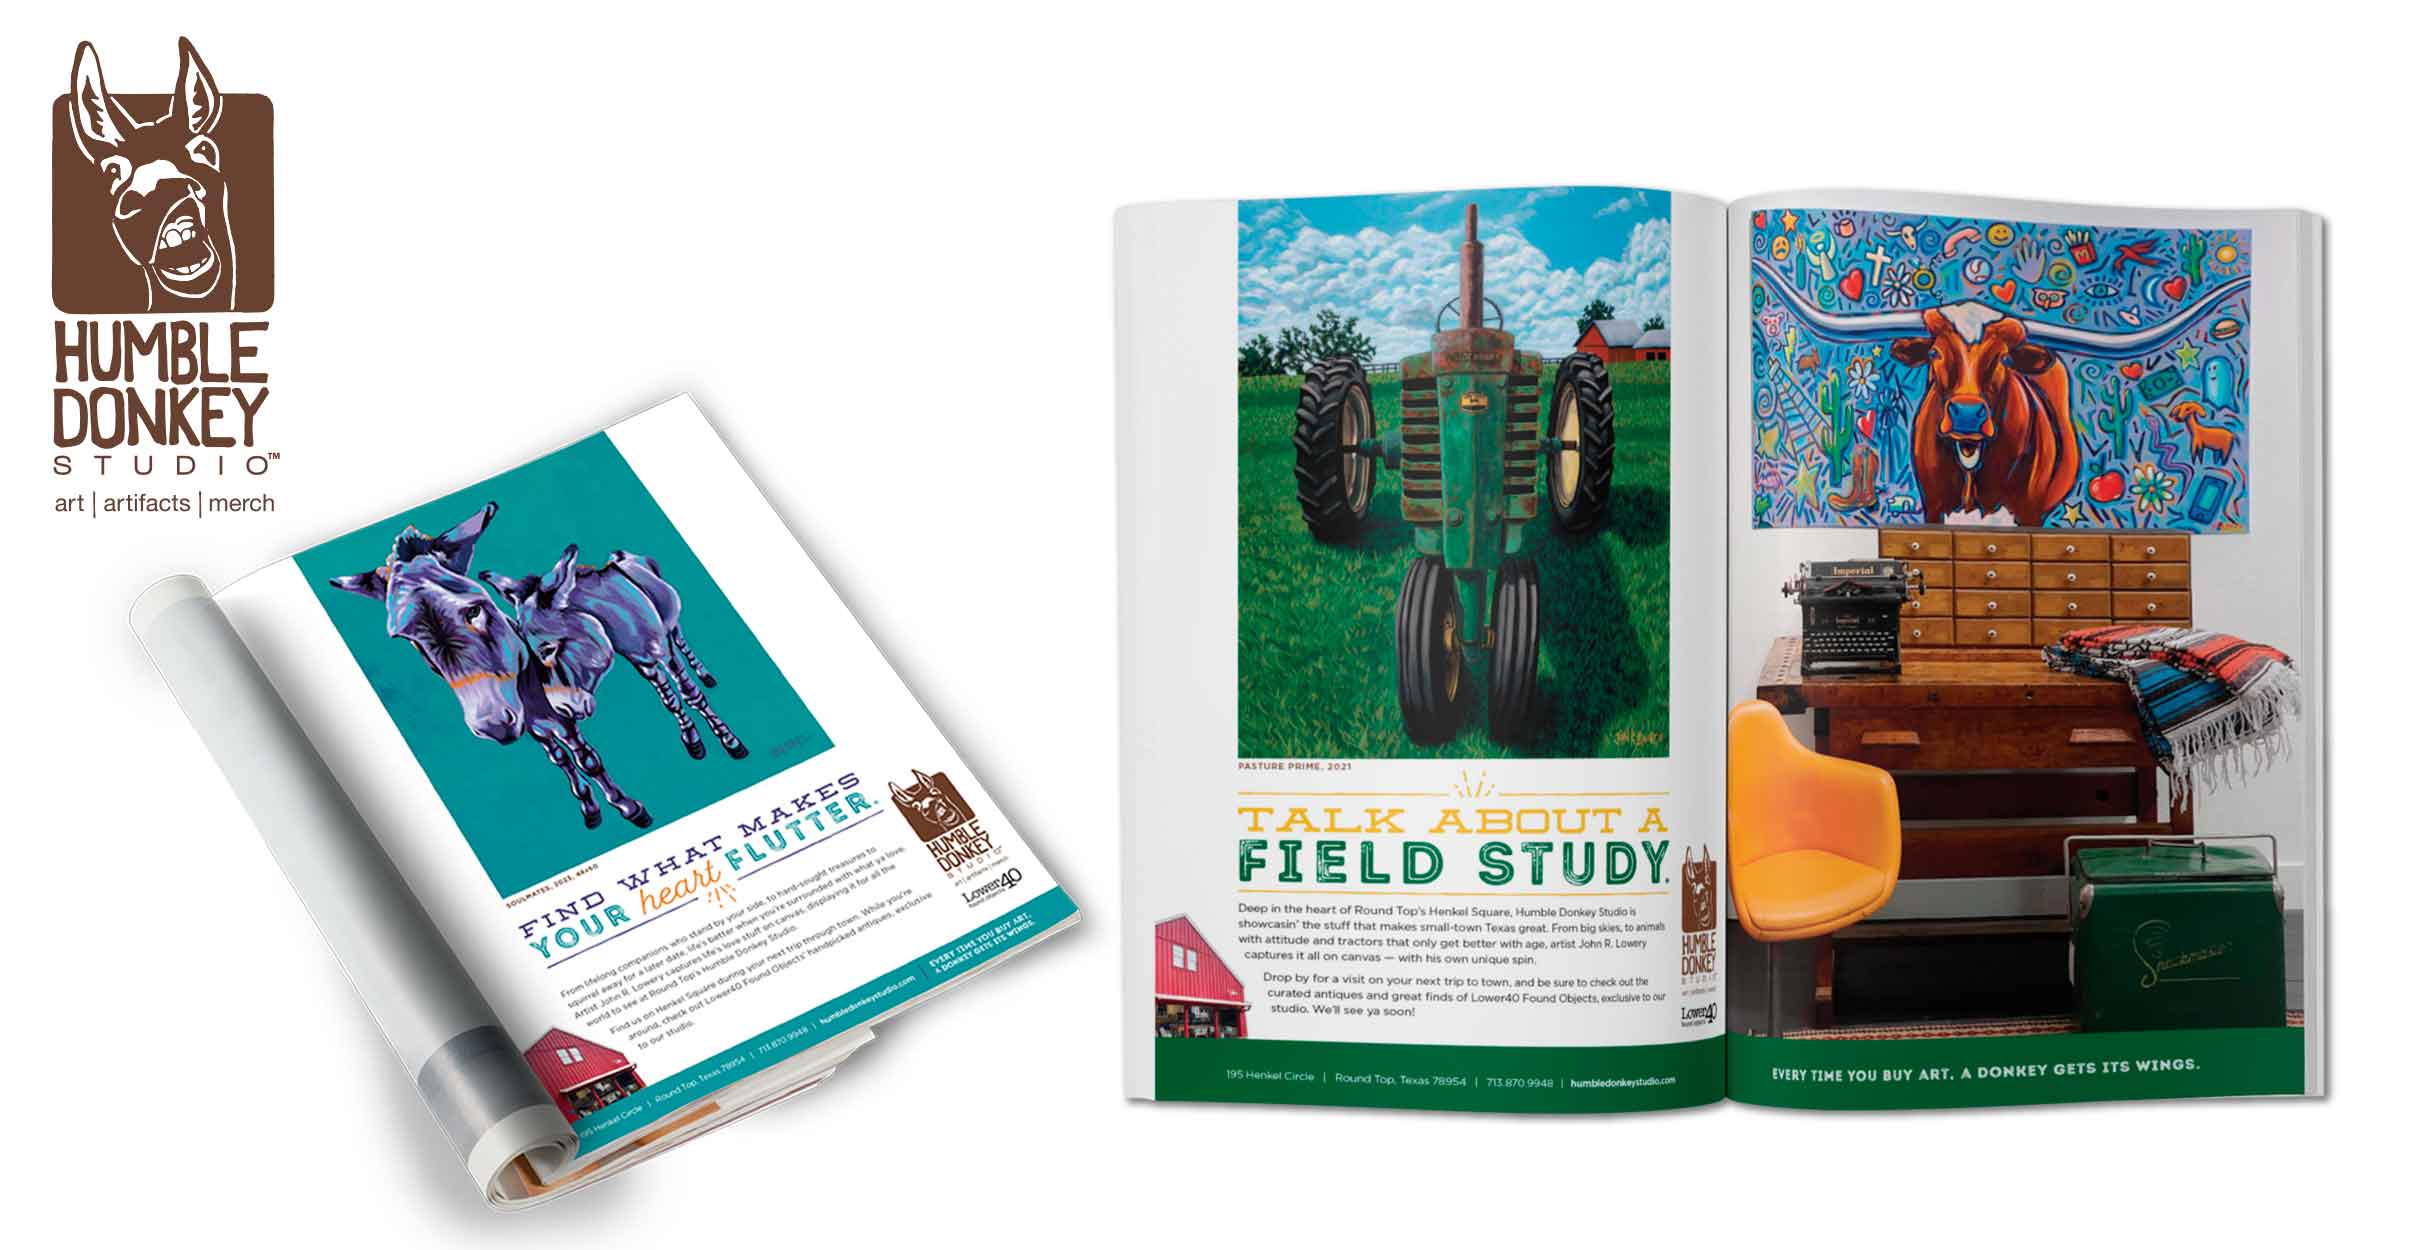 Magazine spread art marketing examples for Round Top’s Humble Donkey